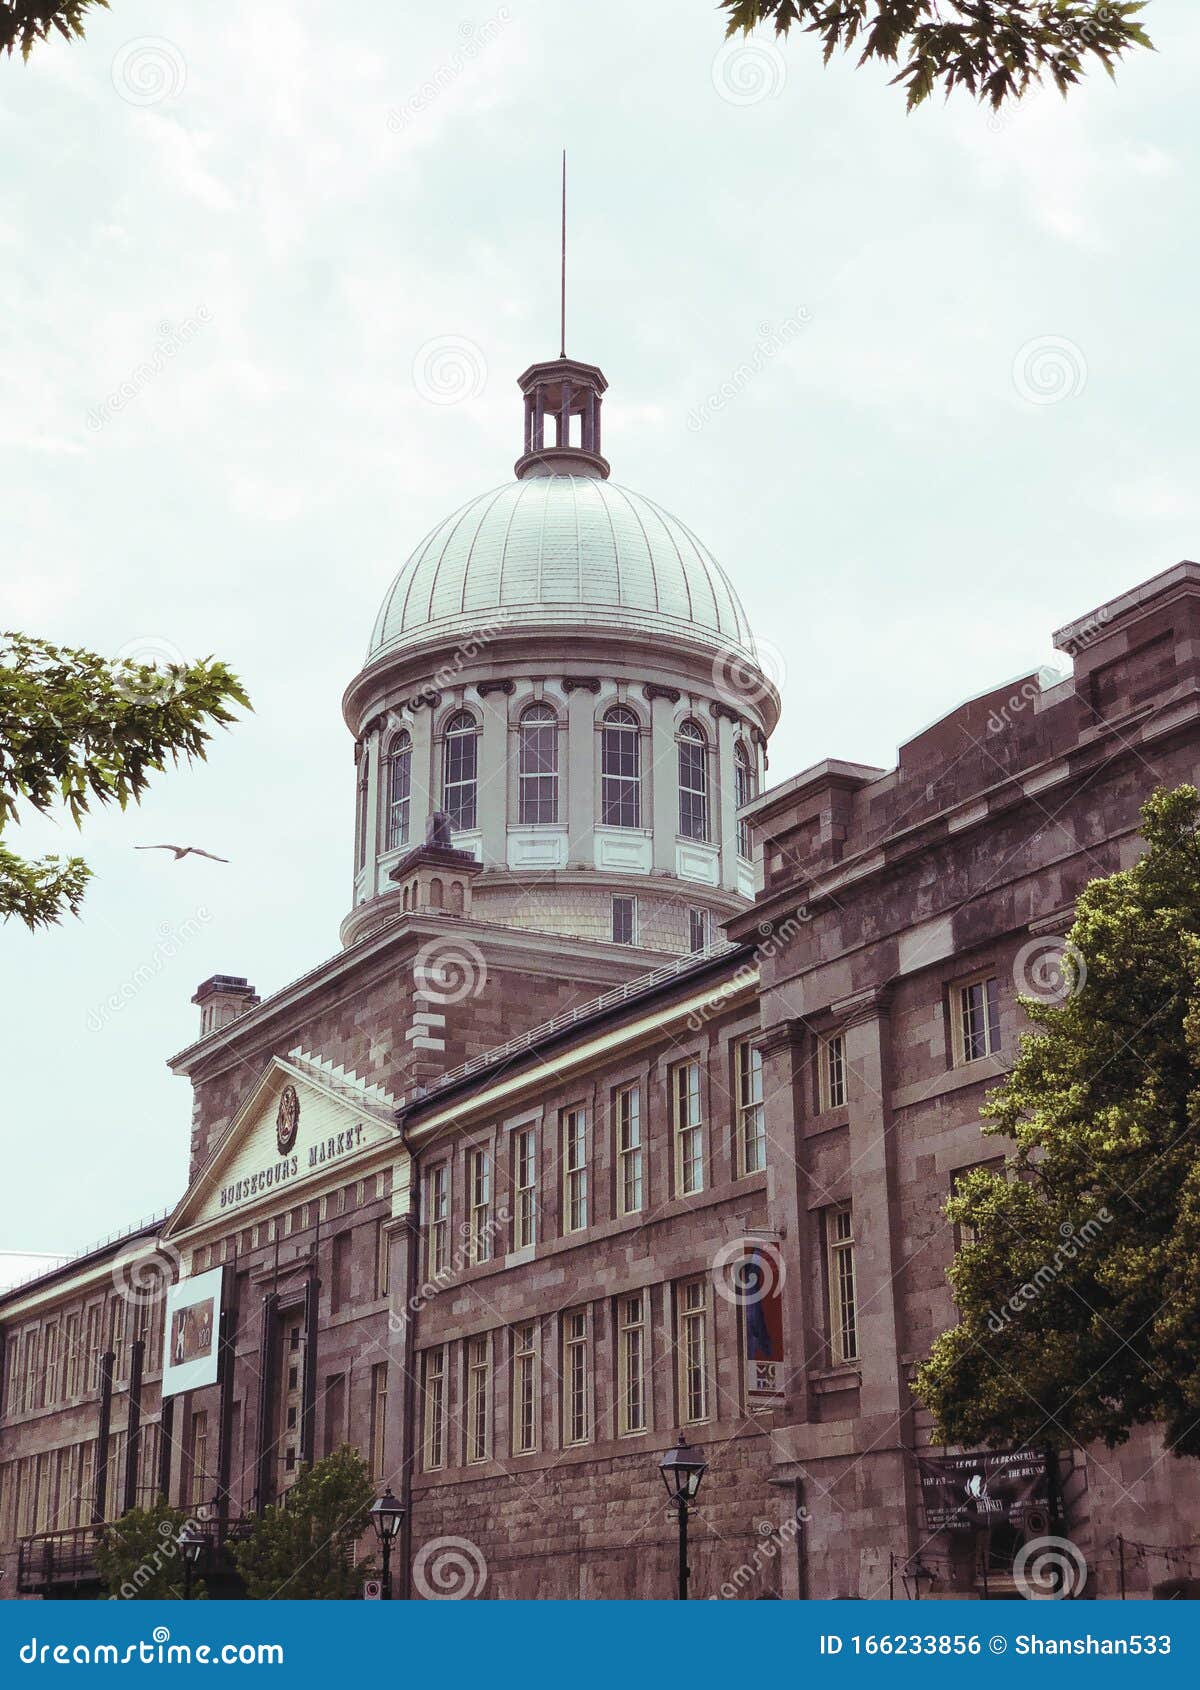 bonsecours market in old montreal